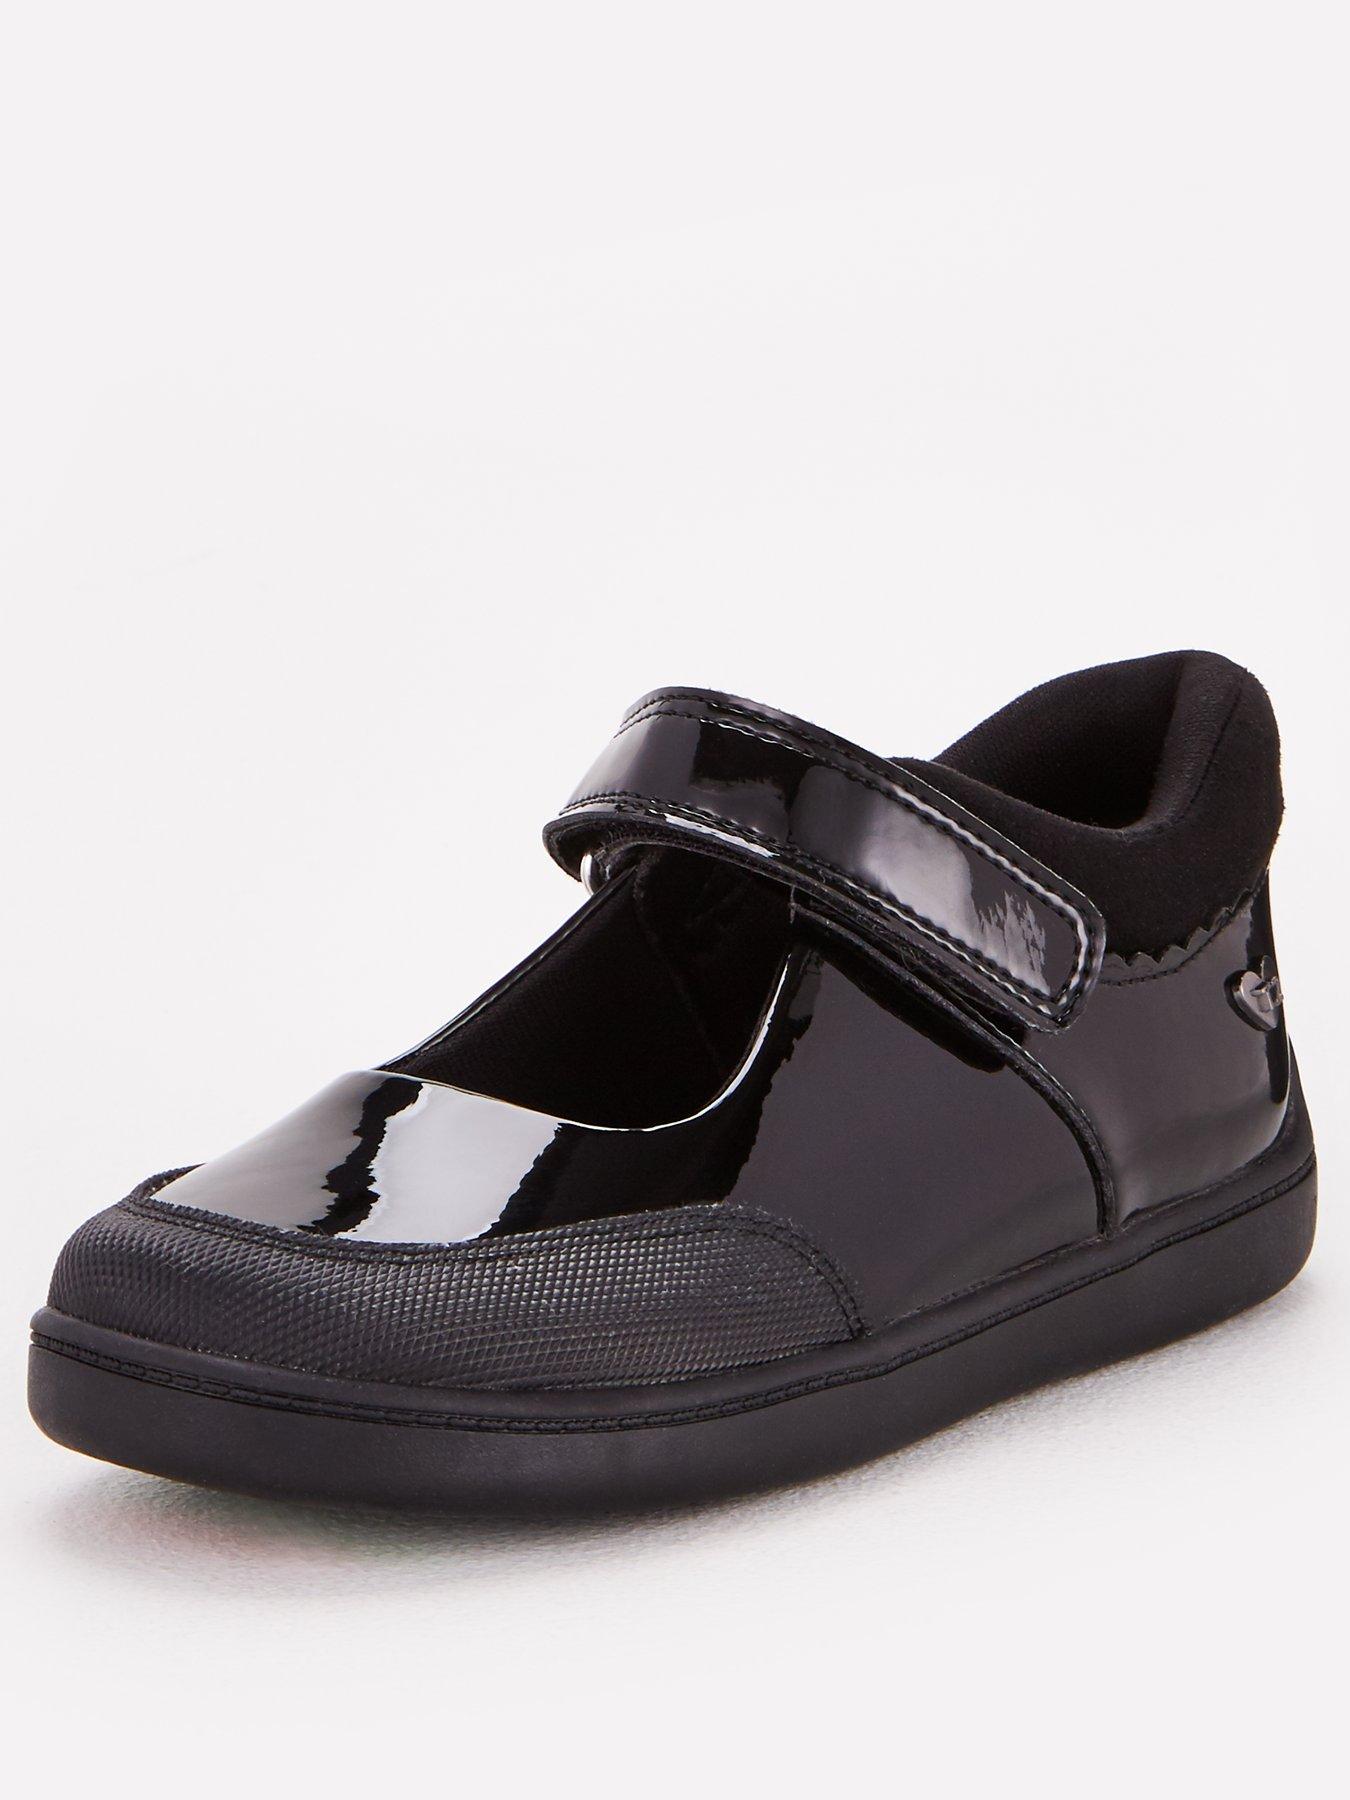 Details about   Boys Leather School Shoes Scuff Resistant Trainers Loafers Black Party Shoes 